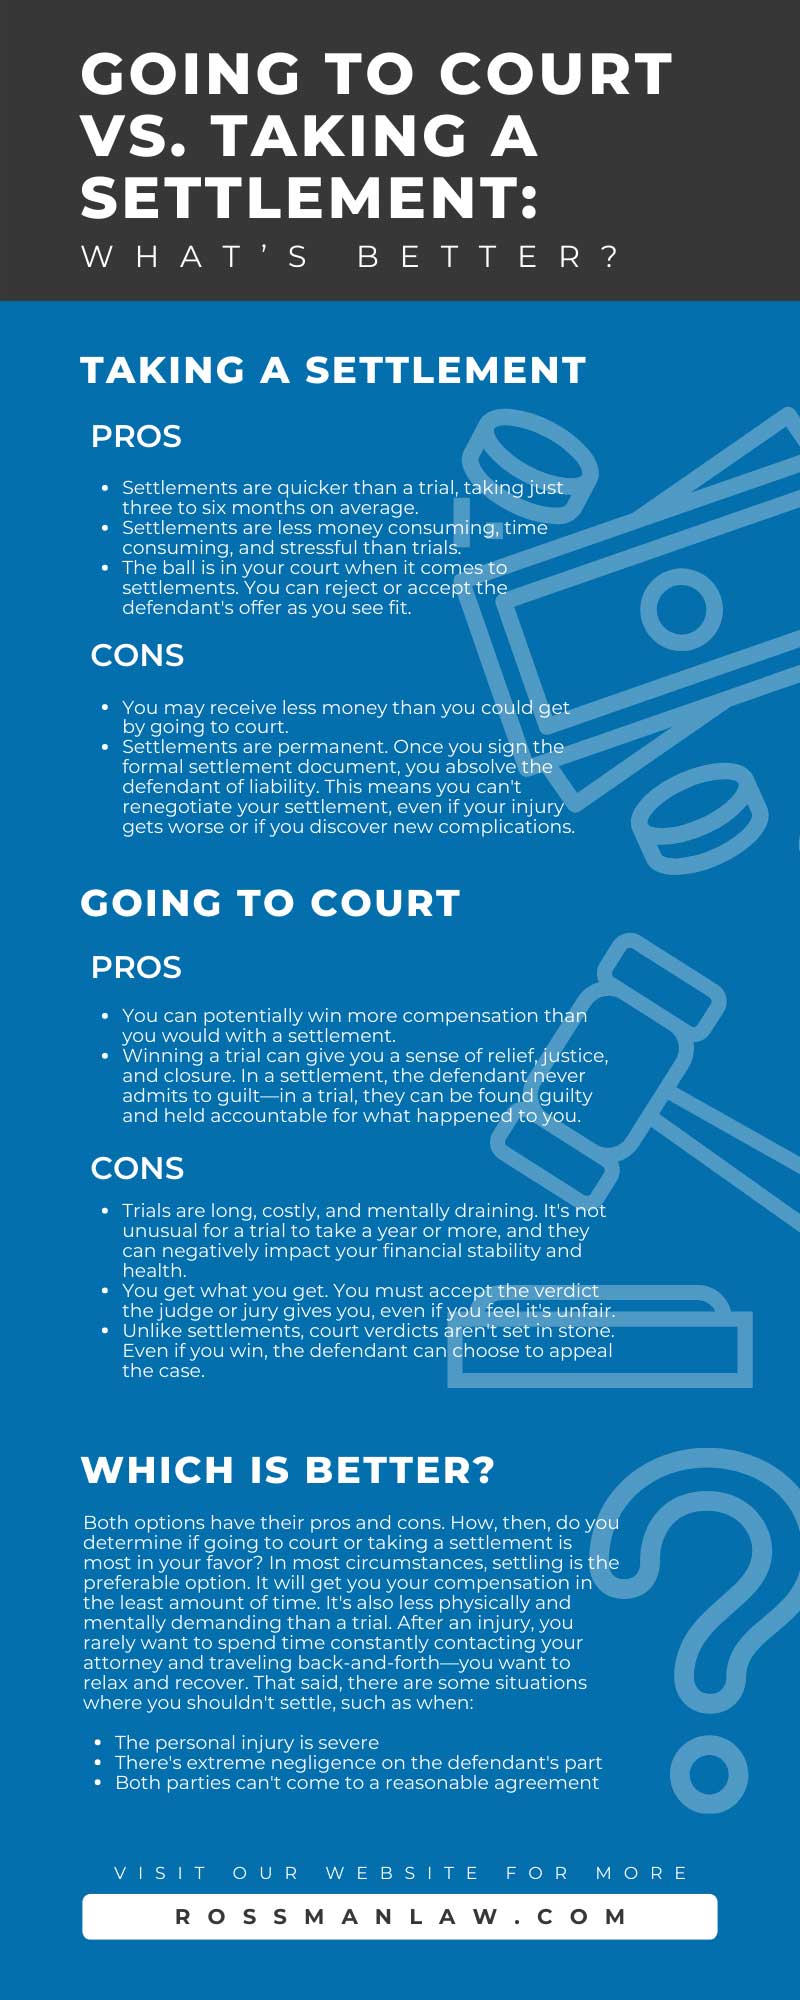 Going To Court vs. Taking a Settlement: What’s Better?